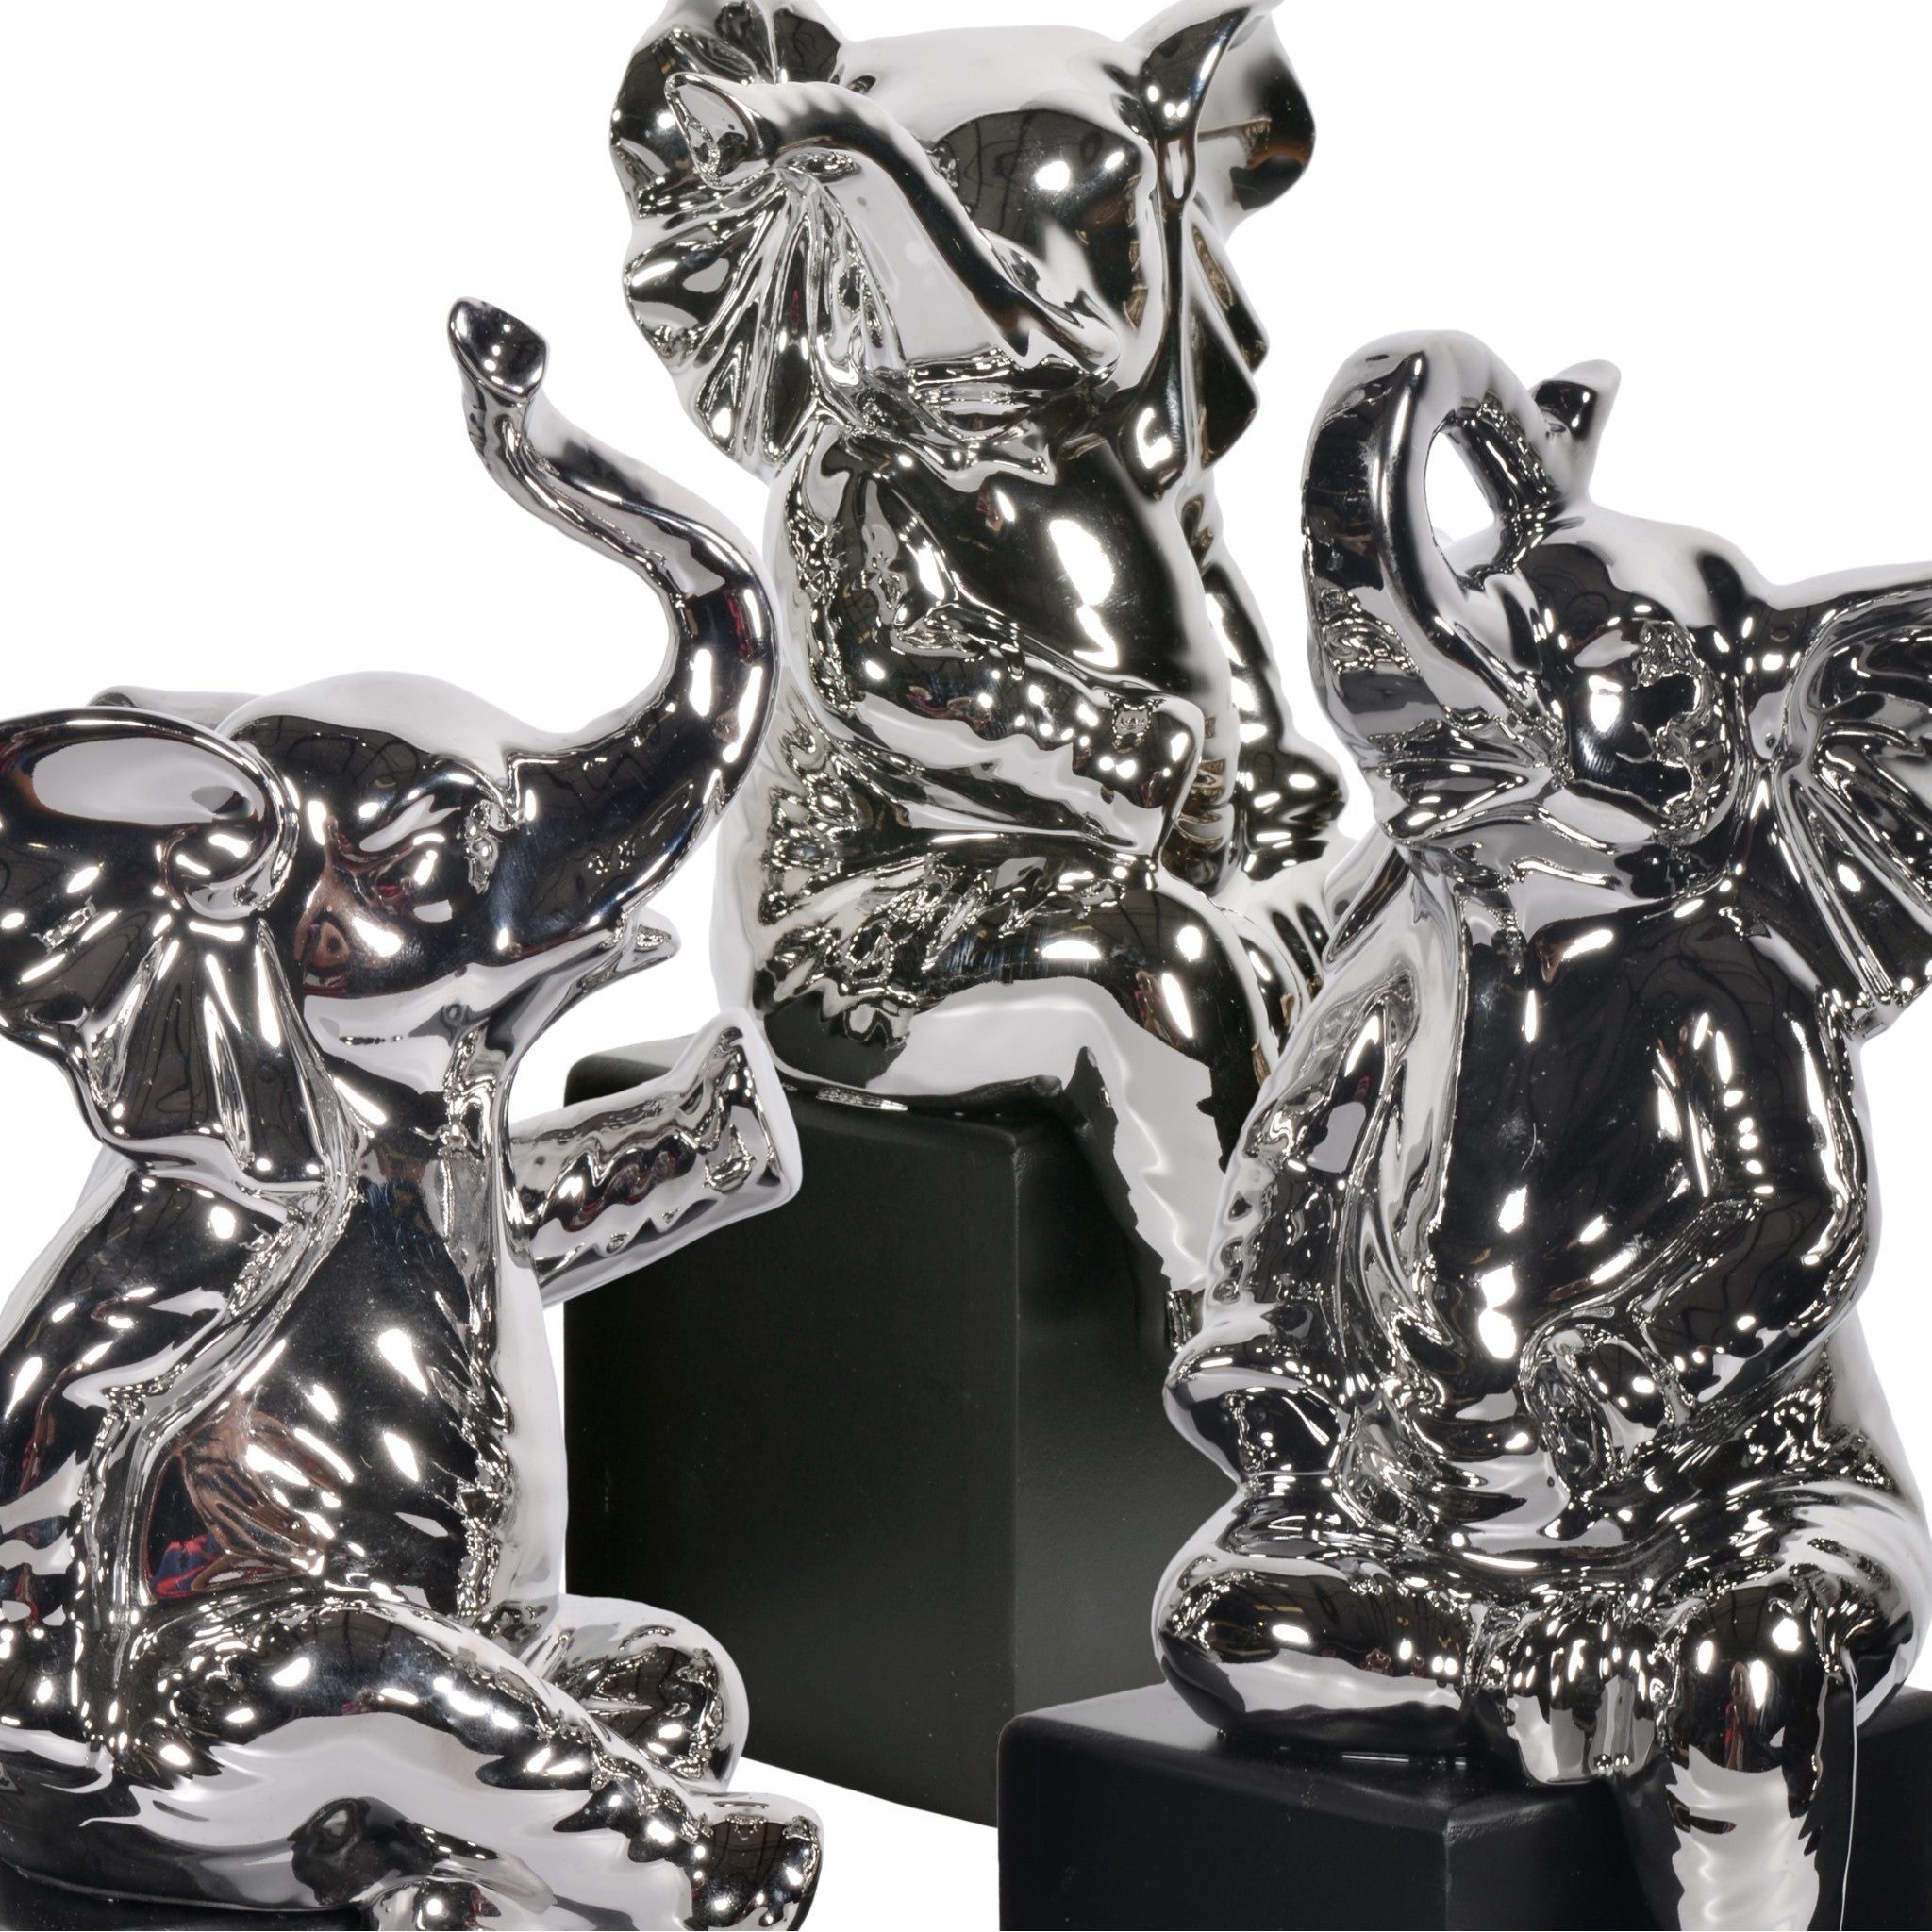 AFD Home  Mirrored Chrome Elephants Set of 3 on Bases - New Star Living